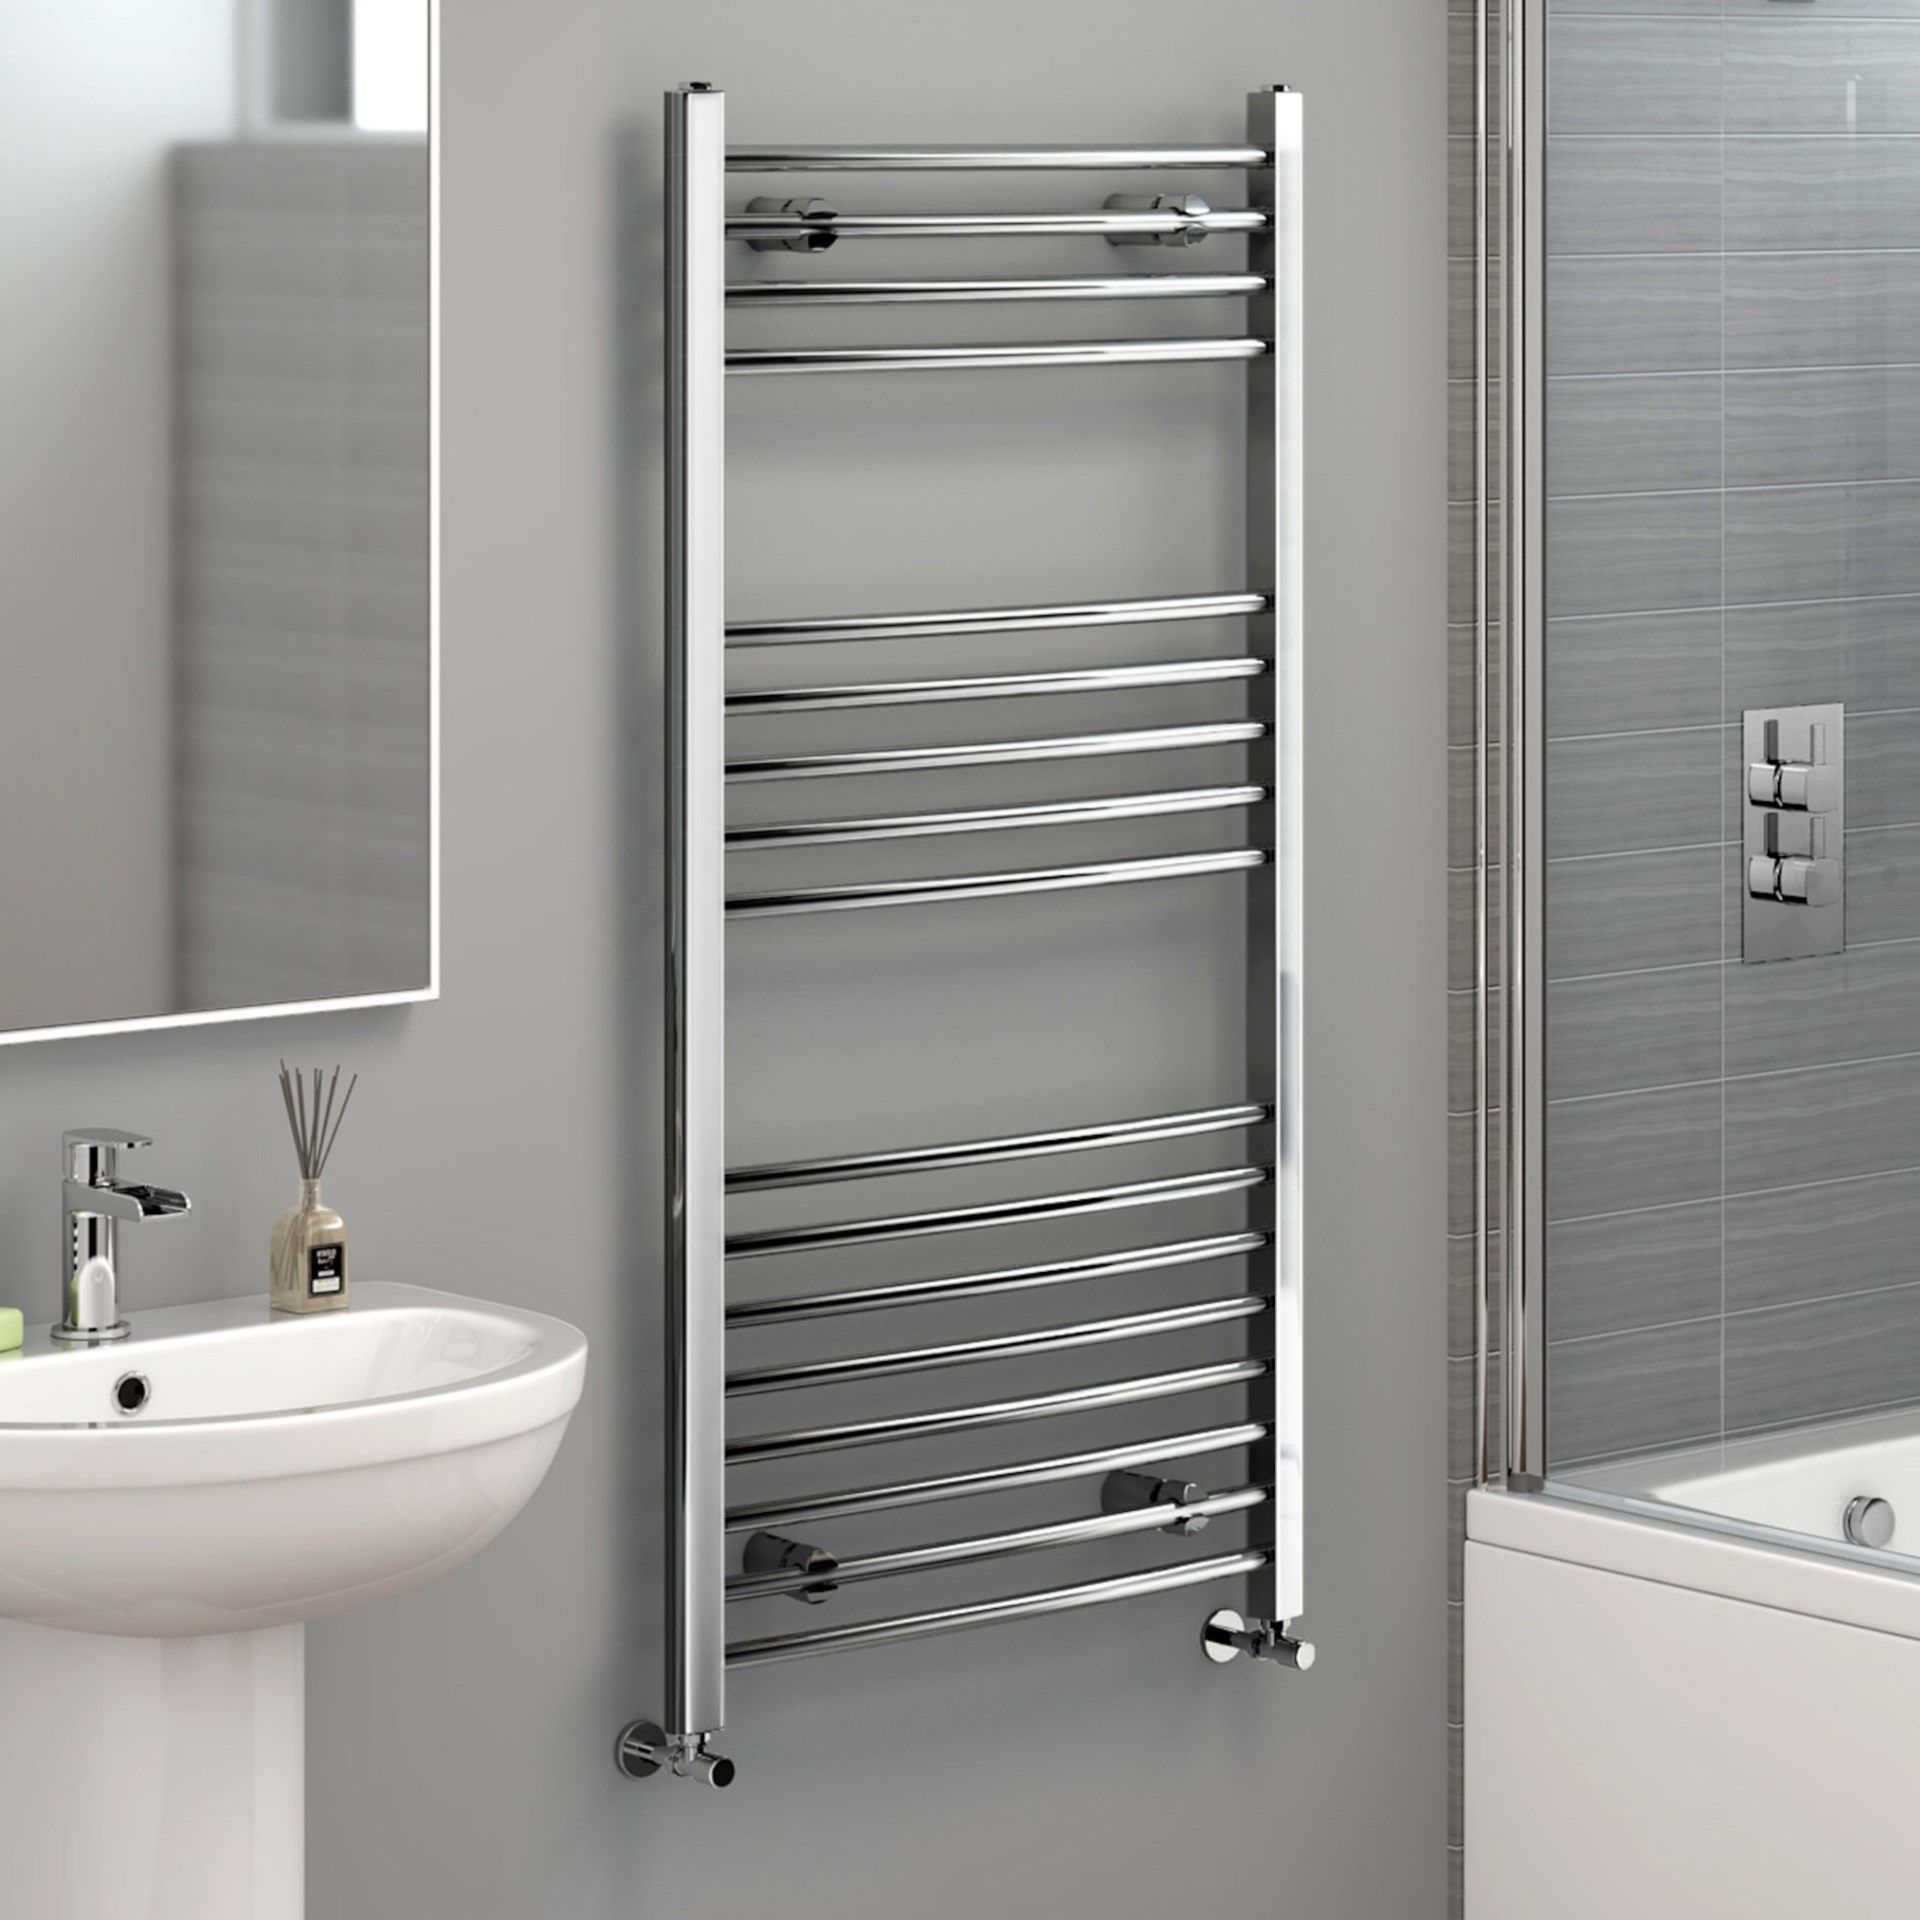 1200x600mm - 20mm Tubes - Chrome Curved Rail Ladder Towel Radiator.NC1200600.Made from chrome p... - Image 3 of 3